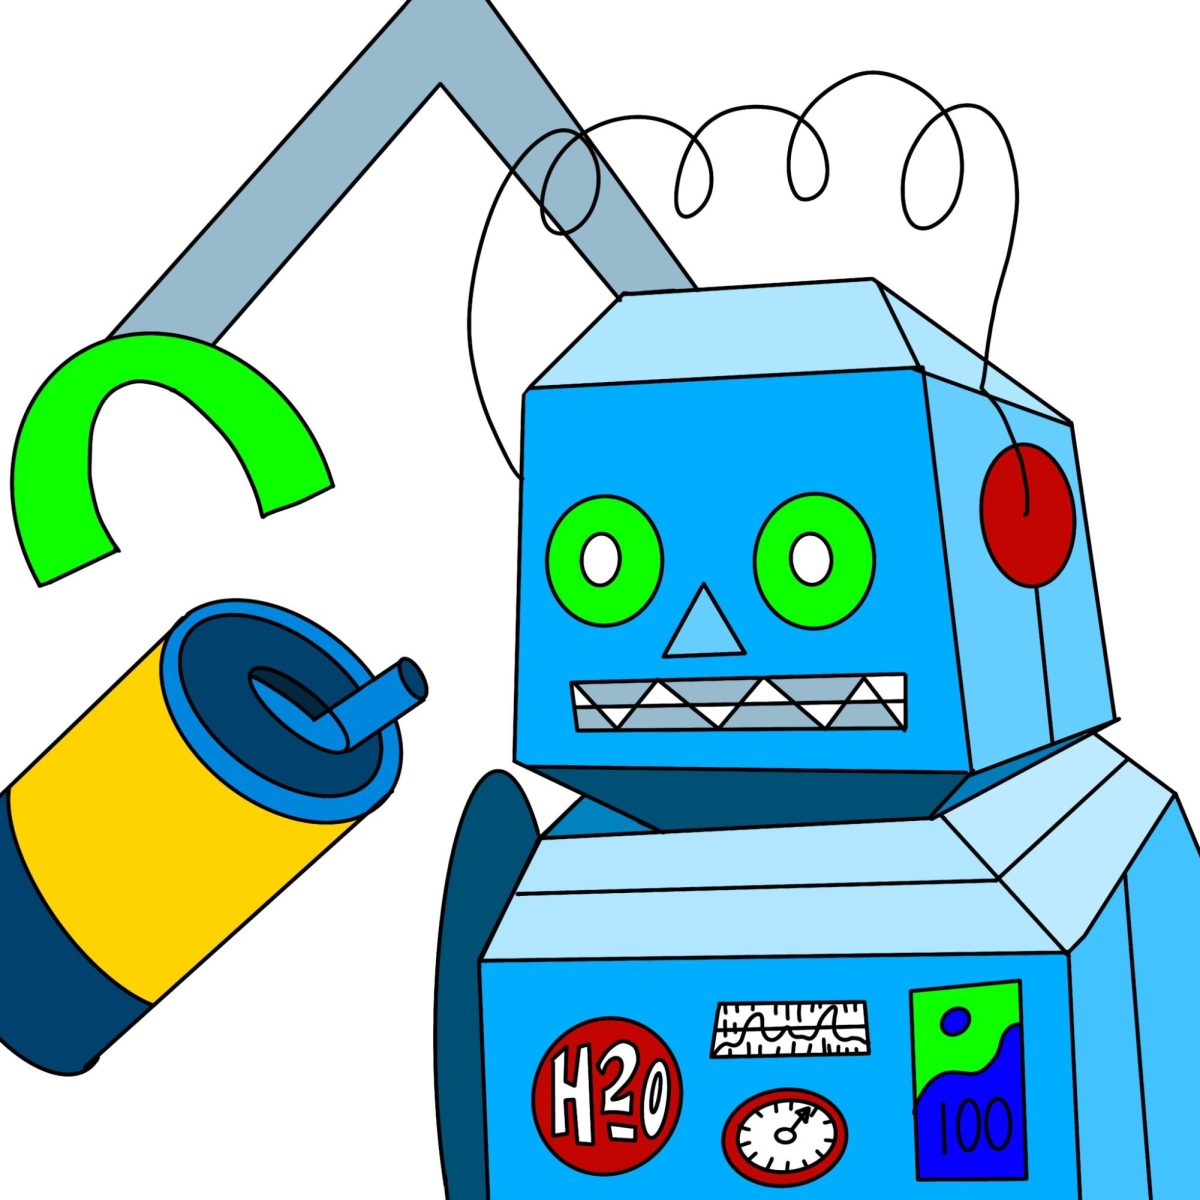 A sentient water dispenser robot reaches an arm out to steal a water bottle.